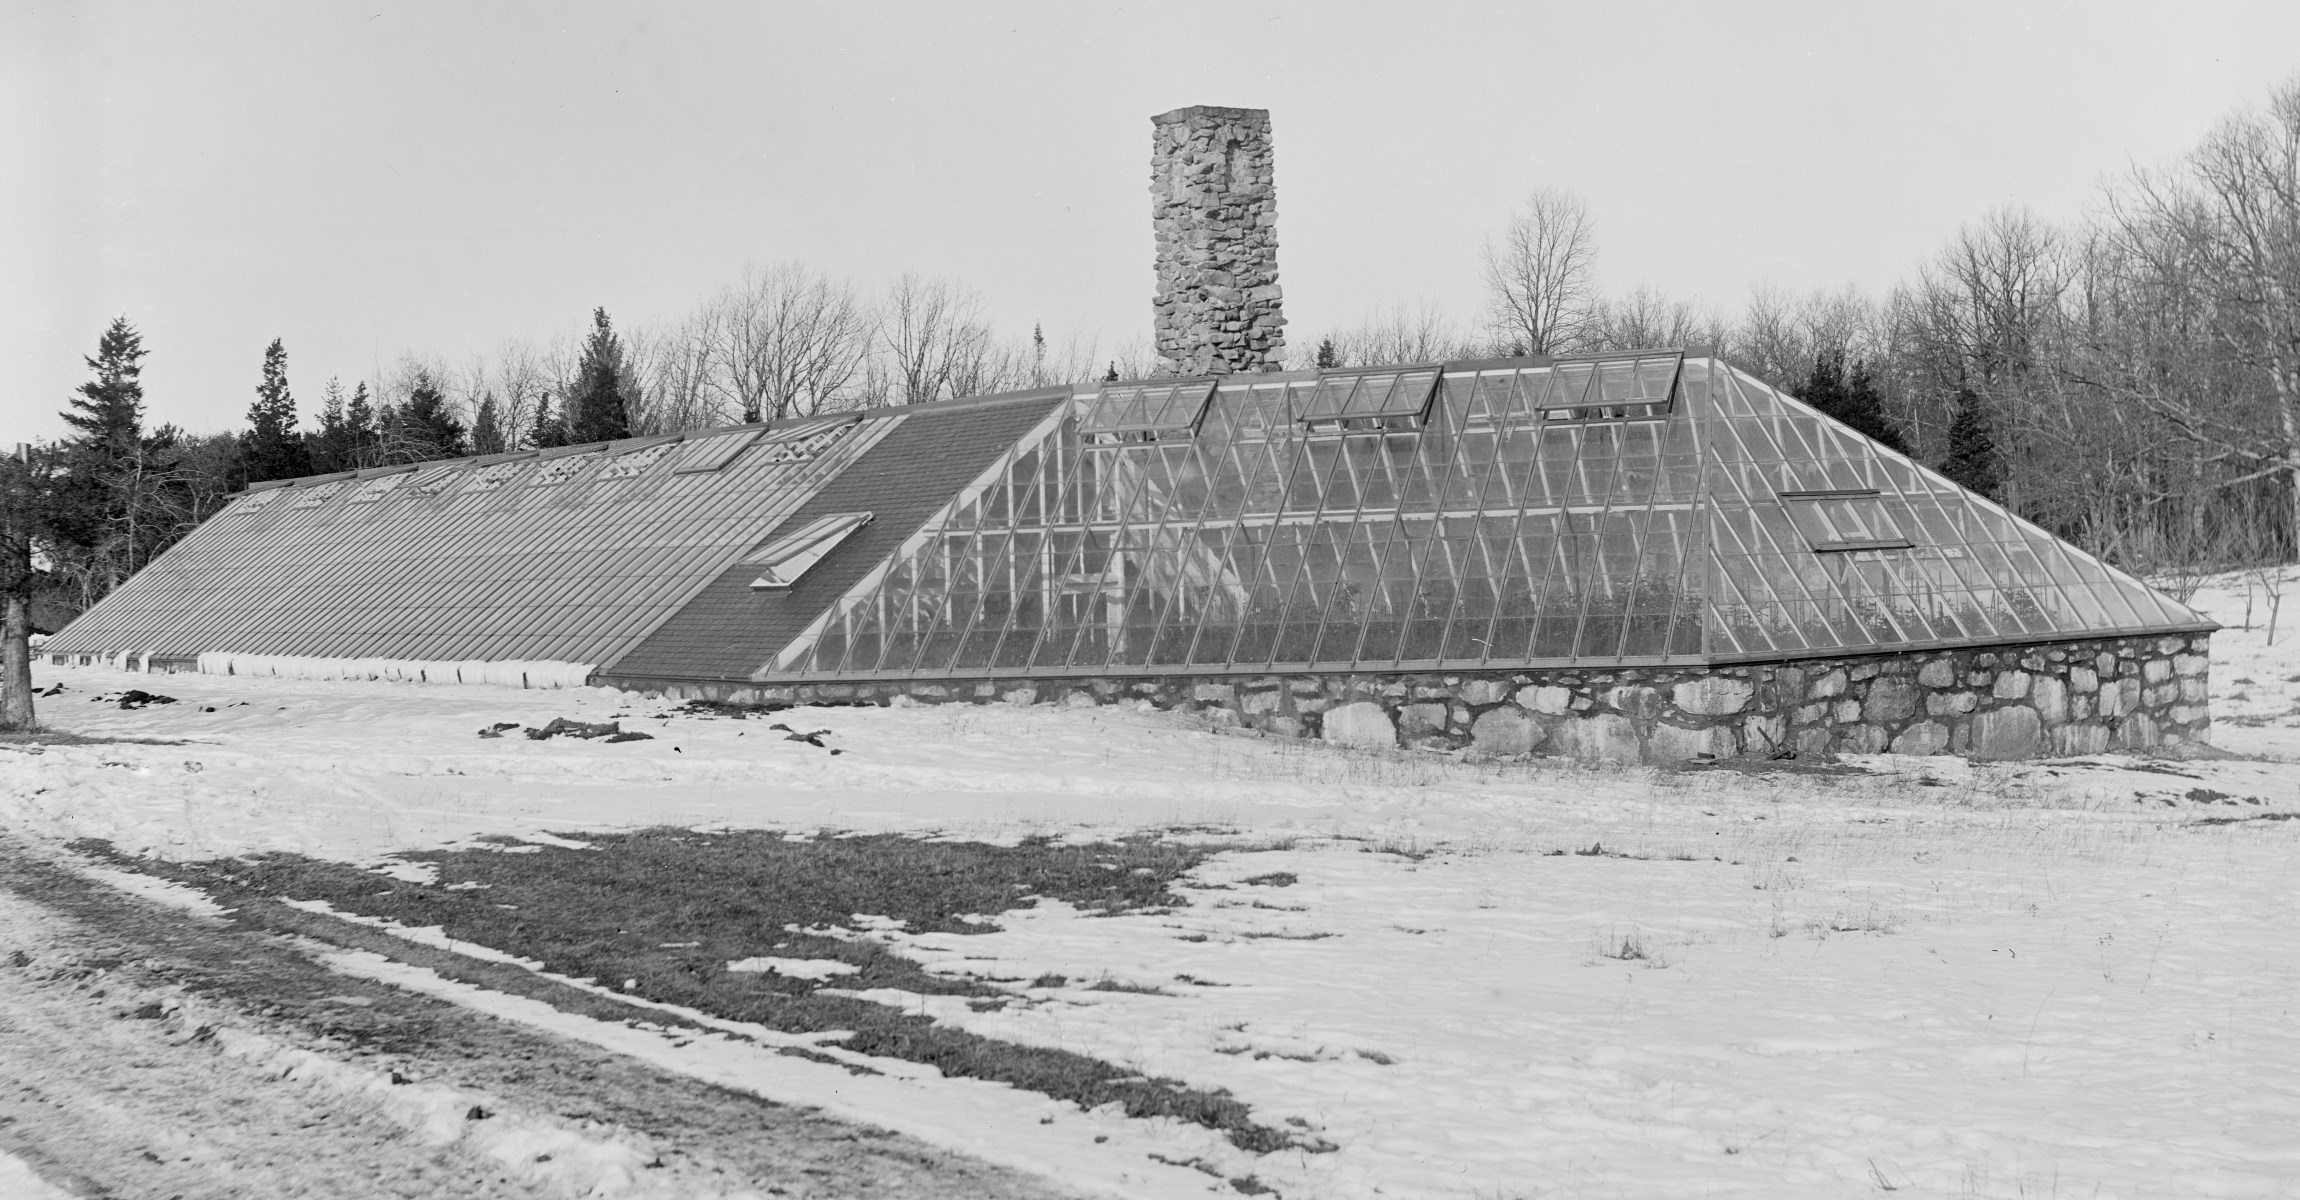 Black and white photograph of back side of greenhouse showing slanted glass roof coming all the way down to snow covered ground.